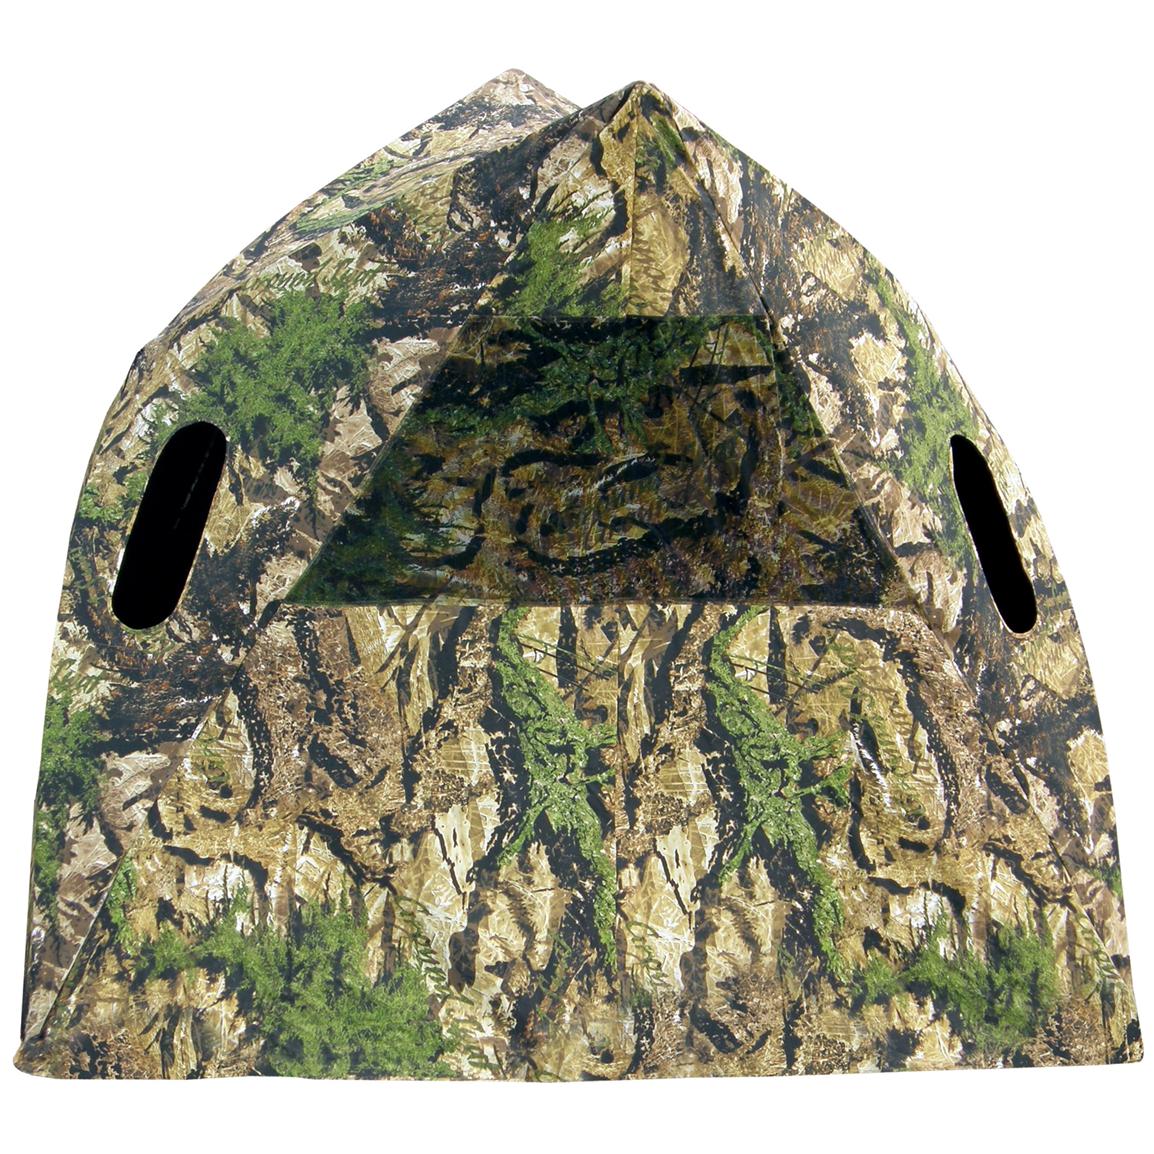 primos-double-bull-t2-blind-159148-ground-blinds-at-sportsman-s-guide